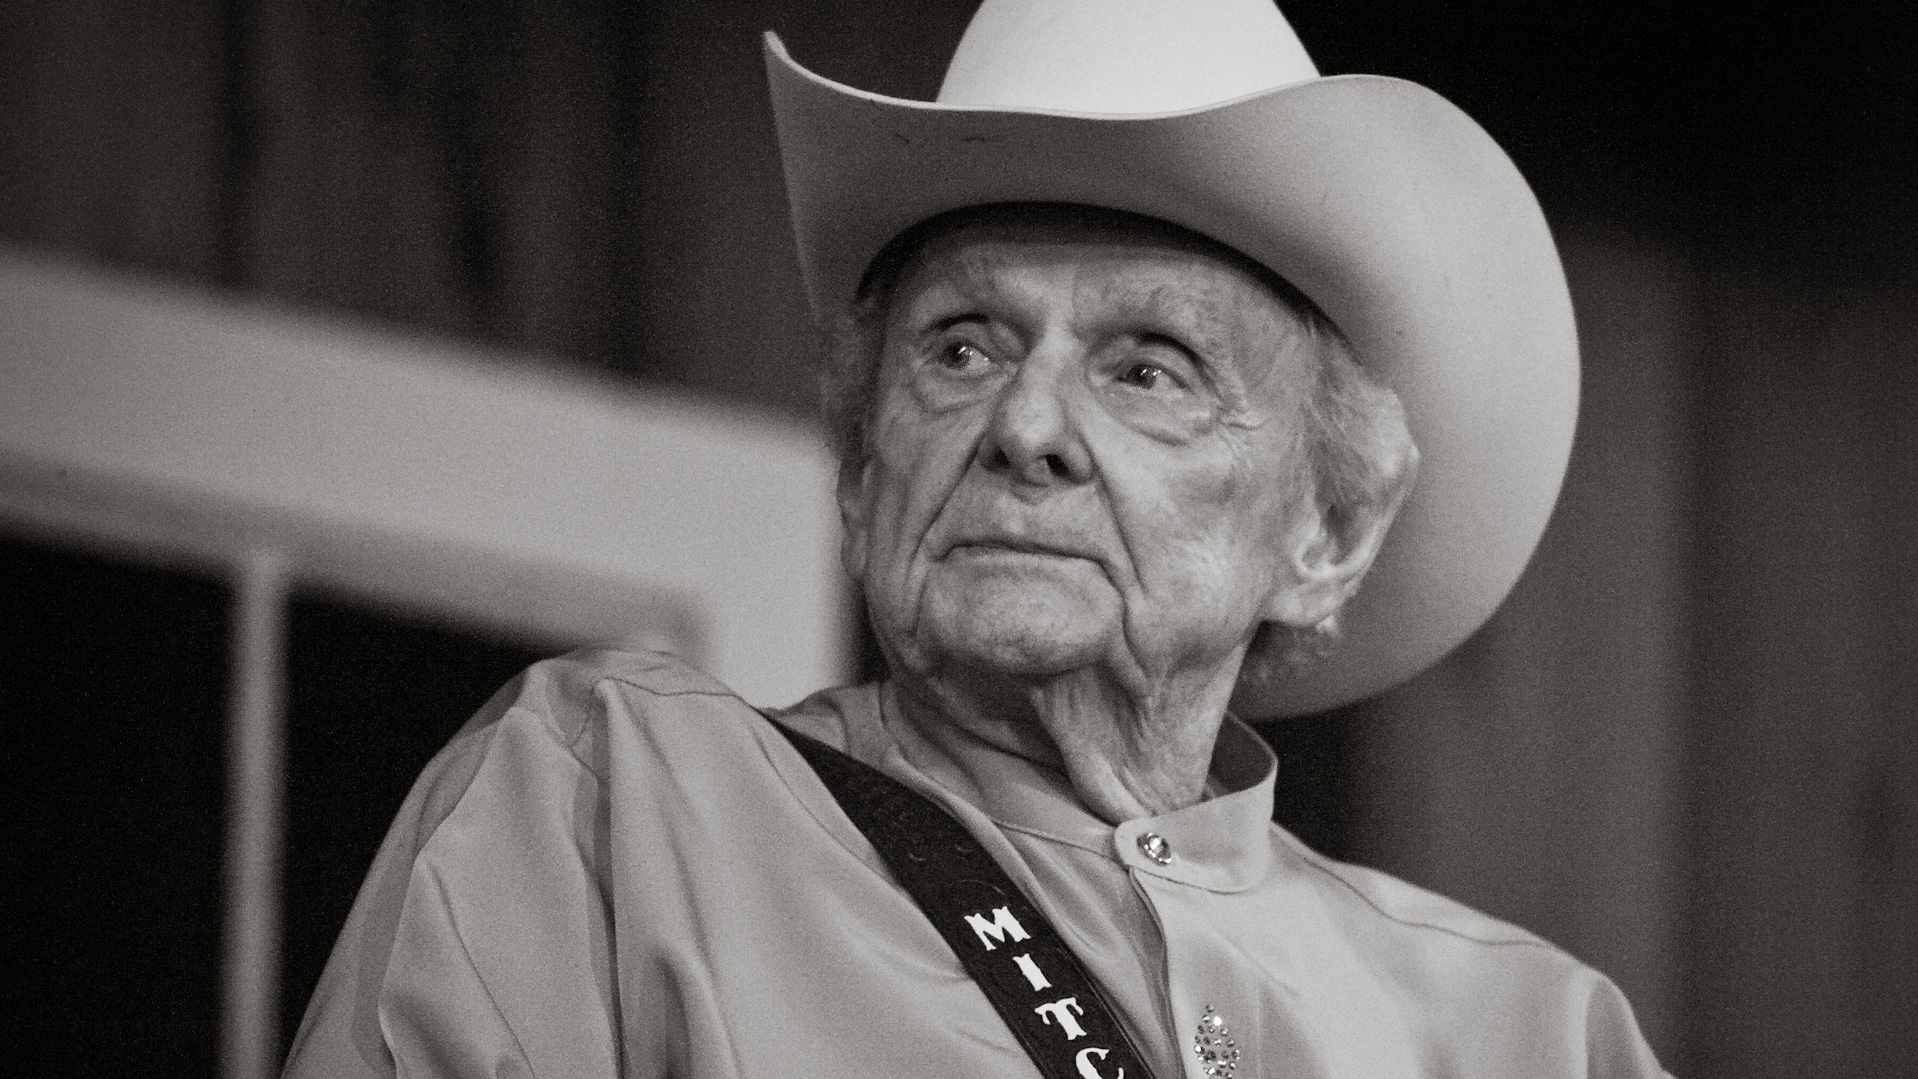 Mountain music pioneer Dr. Ralph Stanley